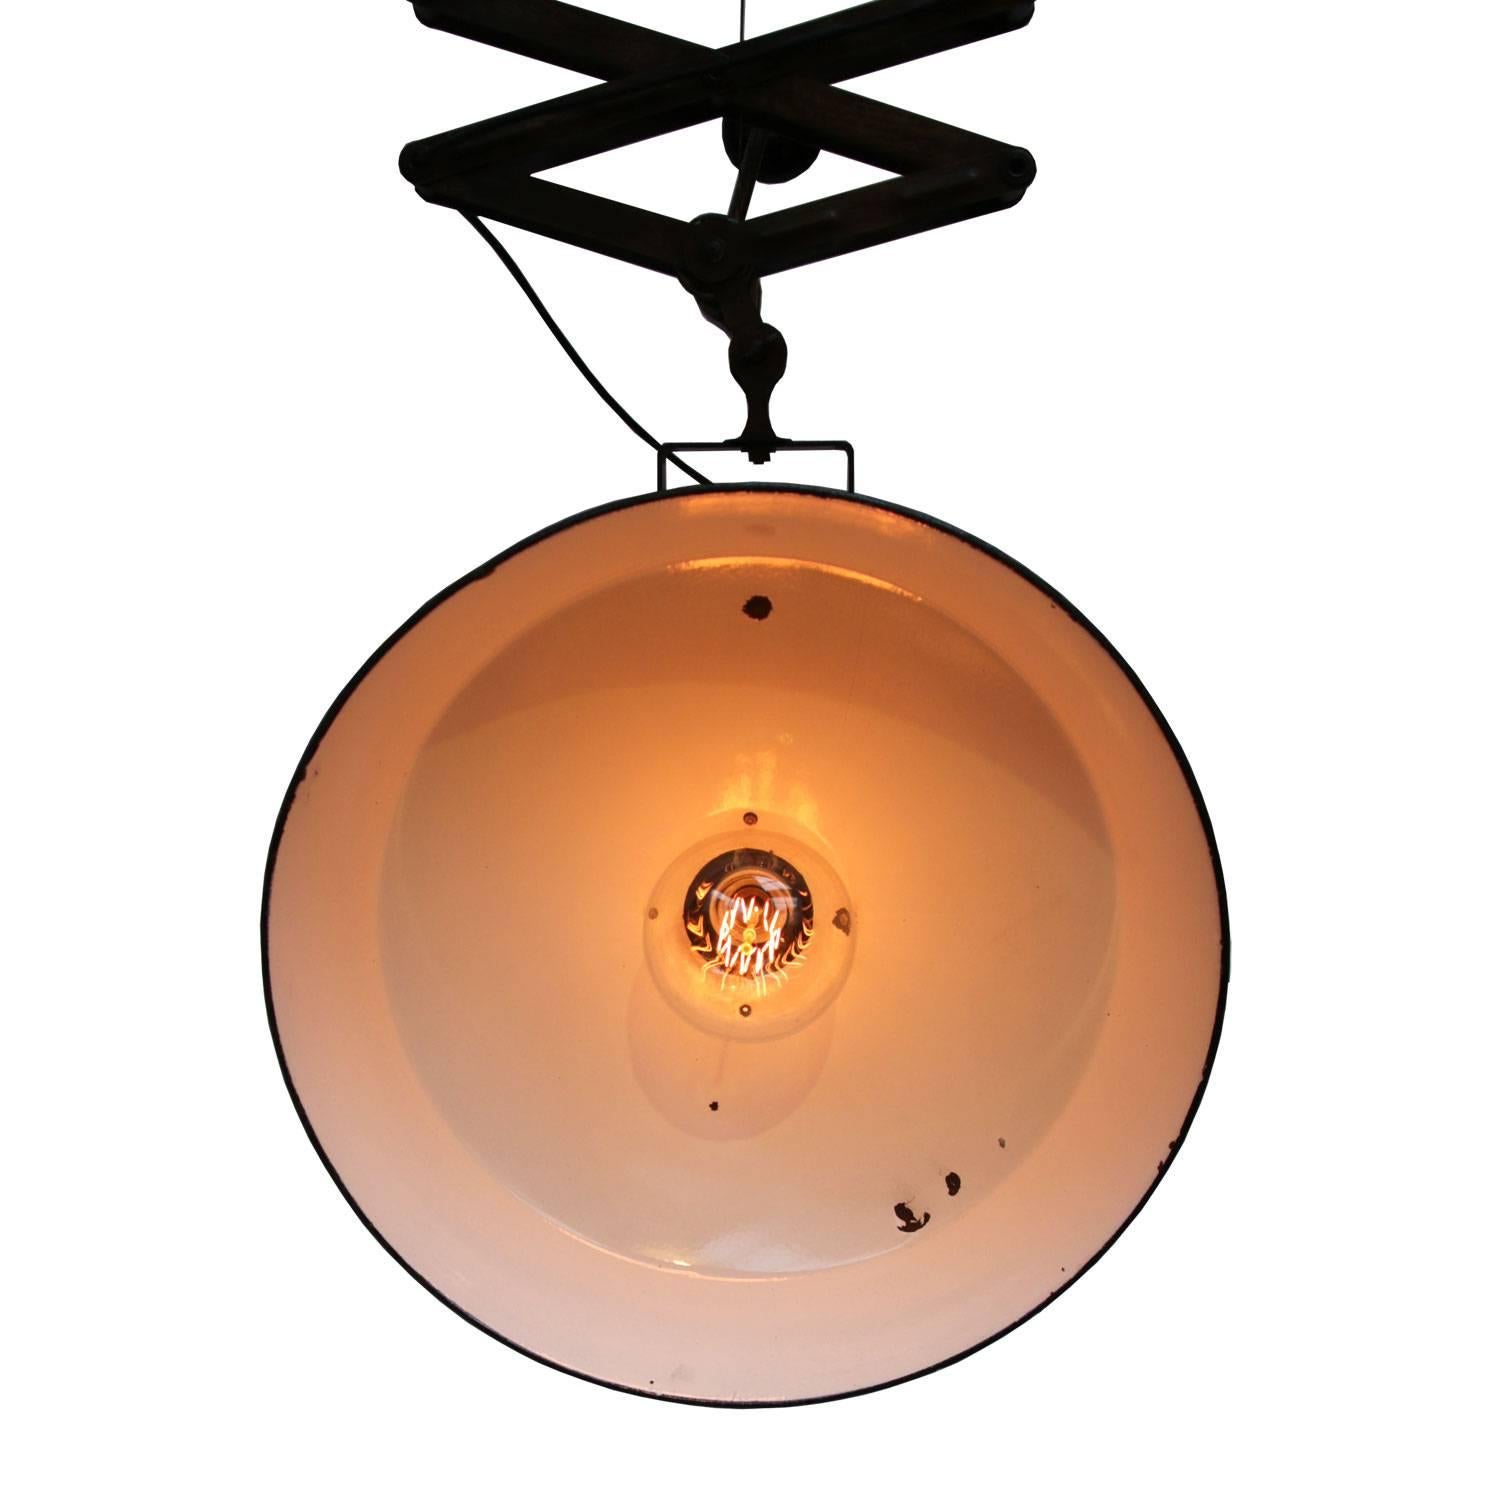 Scissor spring with Industrial hanging lamp.
Design: Black enamel. White interior.
Measures: Diameter shade 52 cm., max length 250 cm. Weight 7.0 kg.

Weight: 7.0 kg / 15.4 lb

Priced per individual item. All lamps have been made suitable by